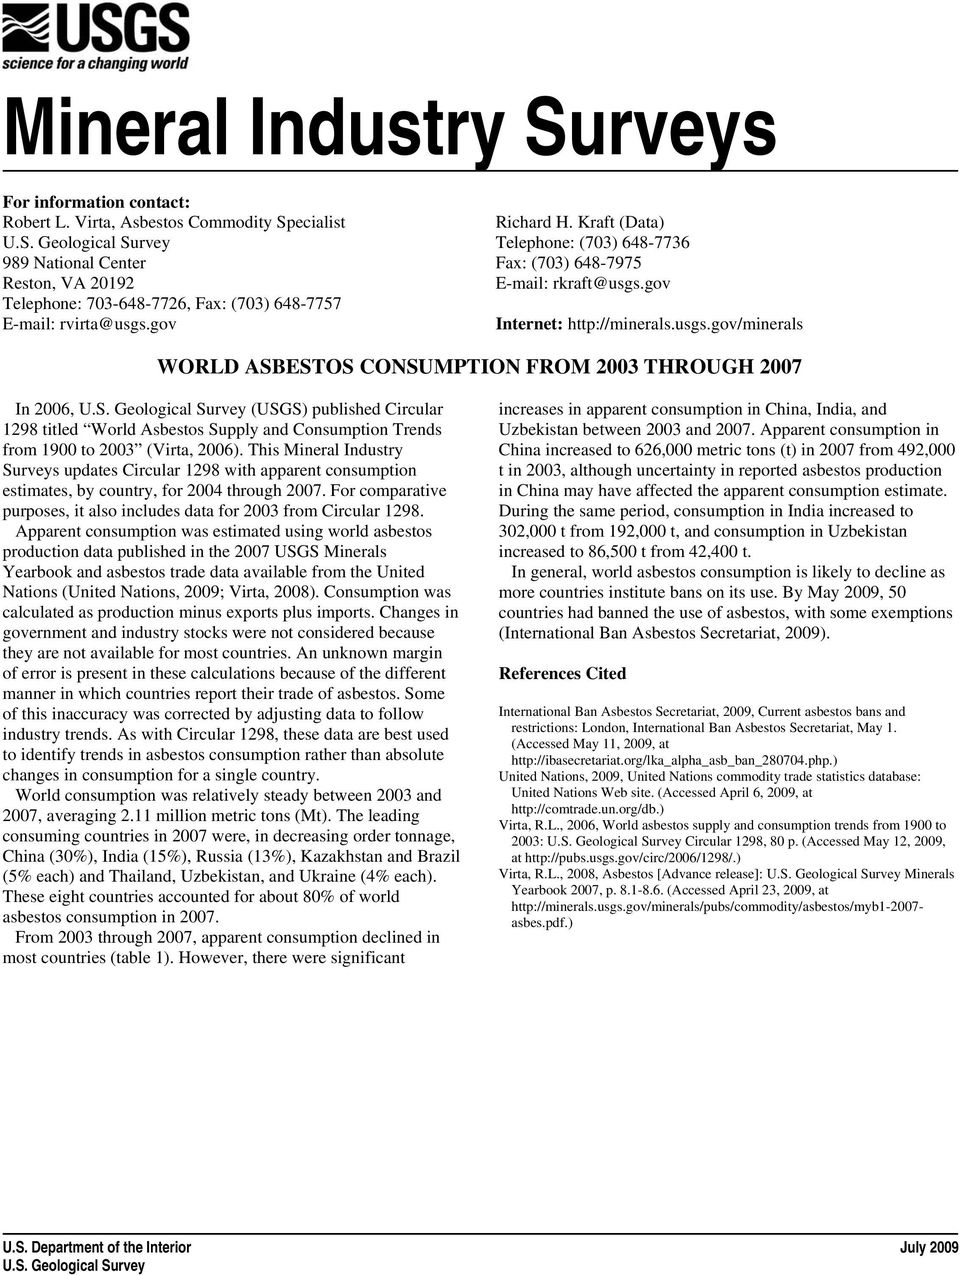 S. Geological Survey (USGS) published Circular 1298 titled World Asbestos Supply and Consumption Trends from 1900 to 2003 (Virta, 2006).